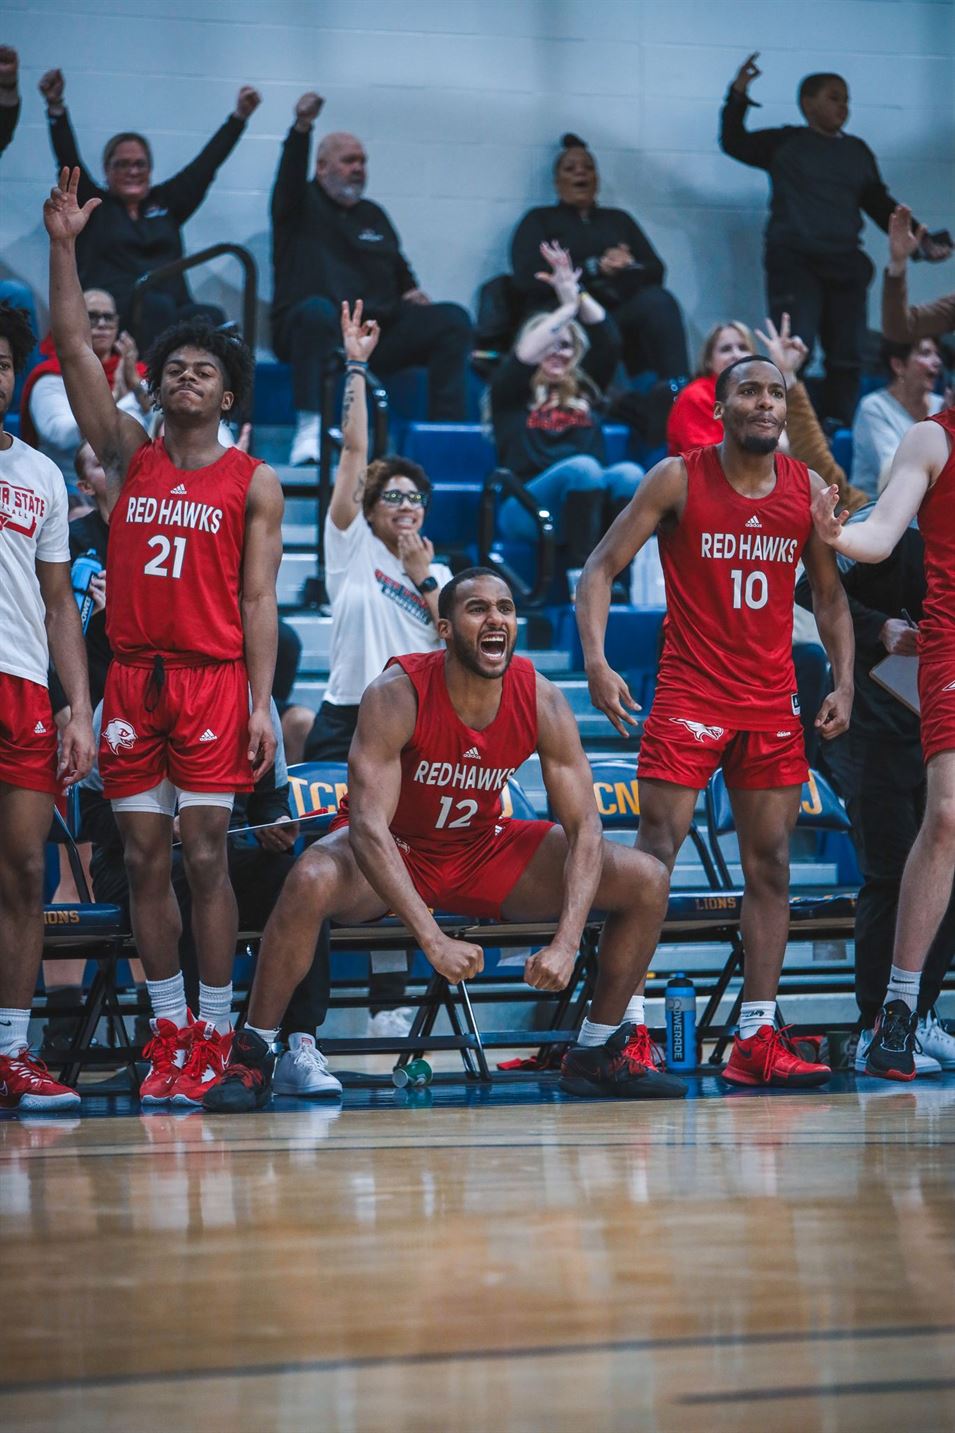 Francisco Paulino celebrates on the bench after a shot is made for the Red Hawks. Markell Robinson | The Montclarion